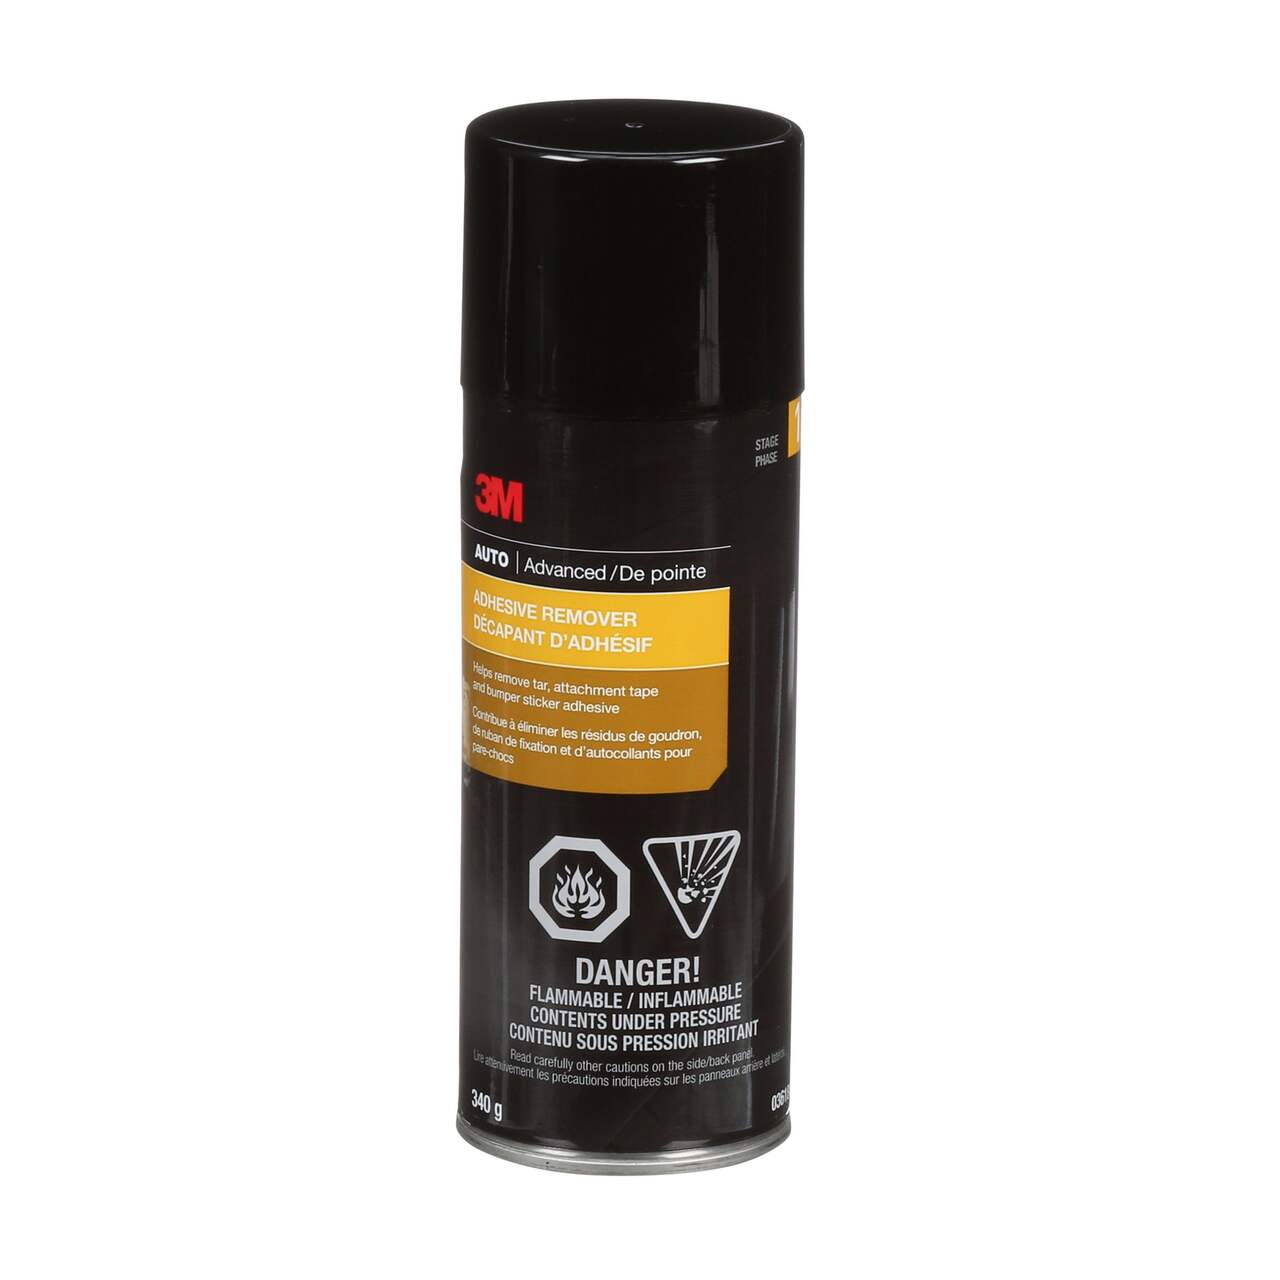 3M Speciality Adhesive Remover, 340-g